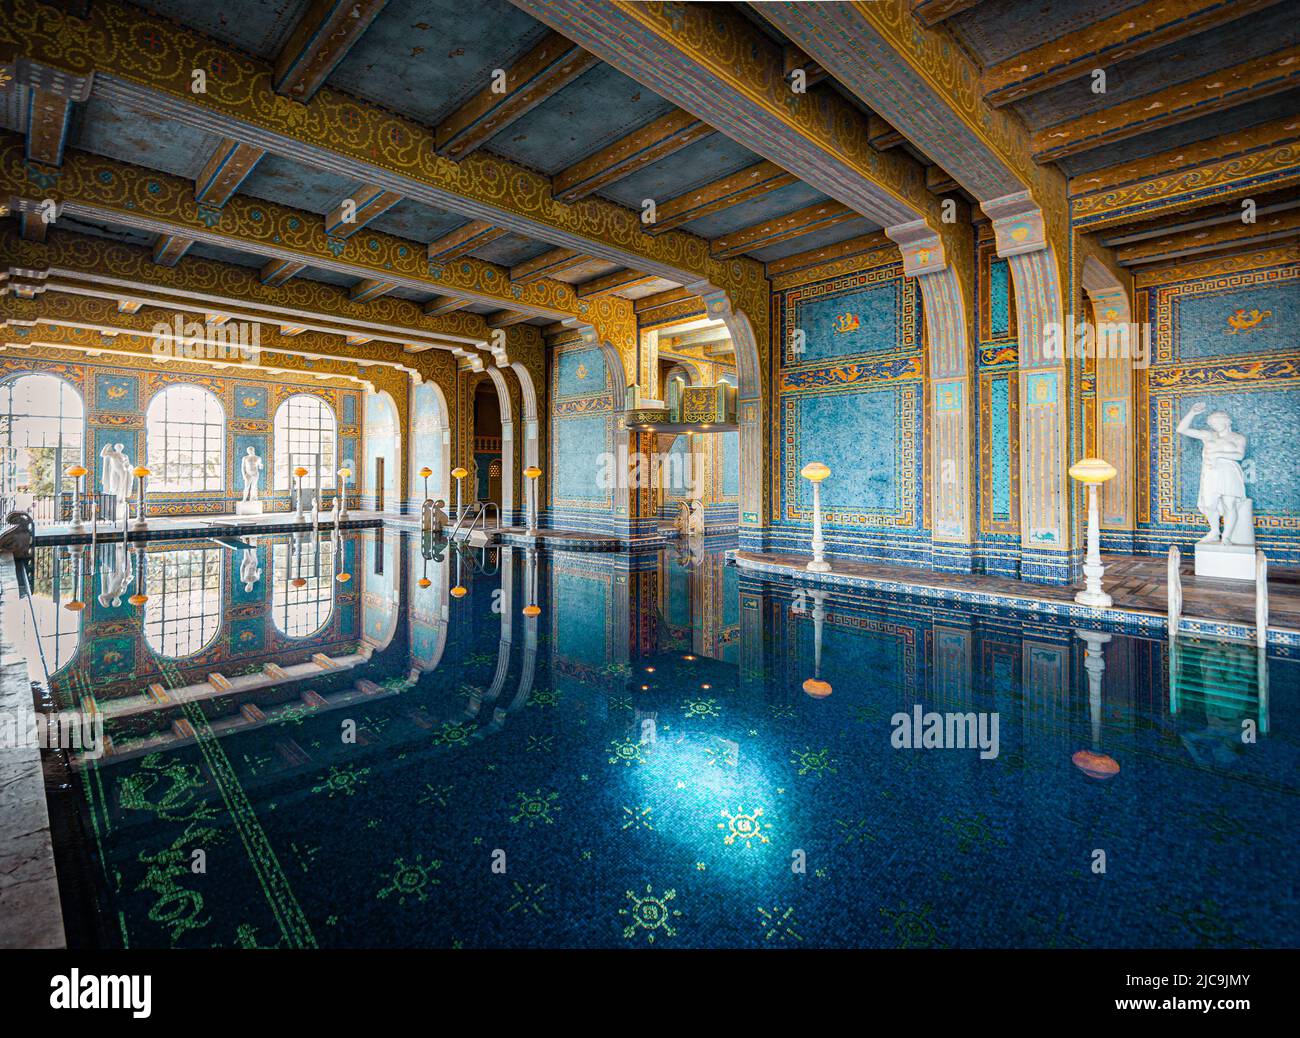 Hearst Castle, United States of America - November 1, 2016: swimming pool in opulent mansion Stock Photo